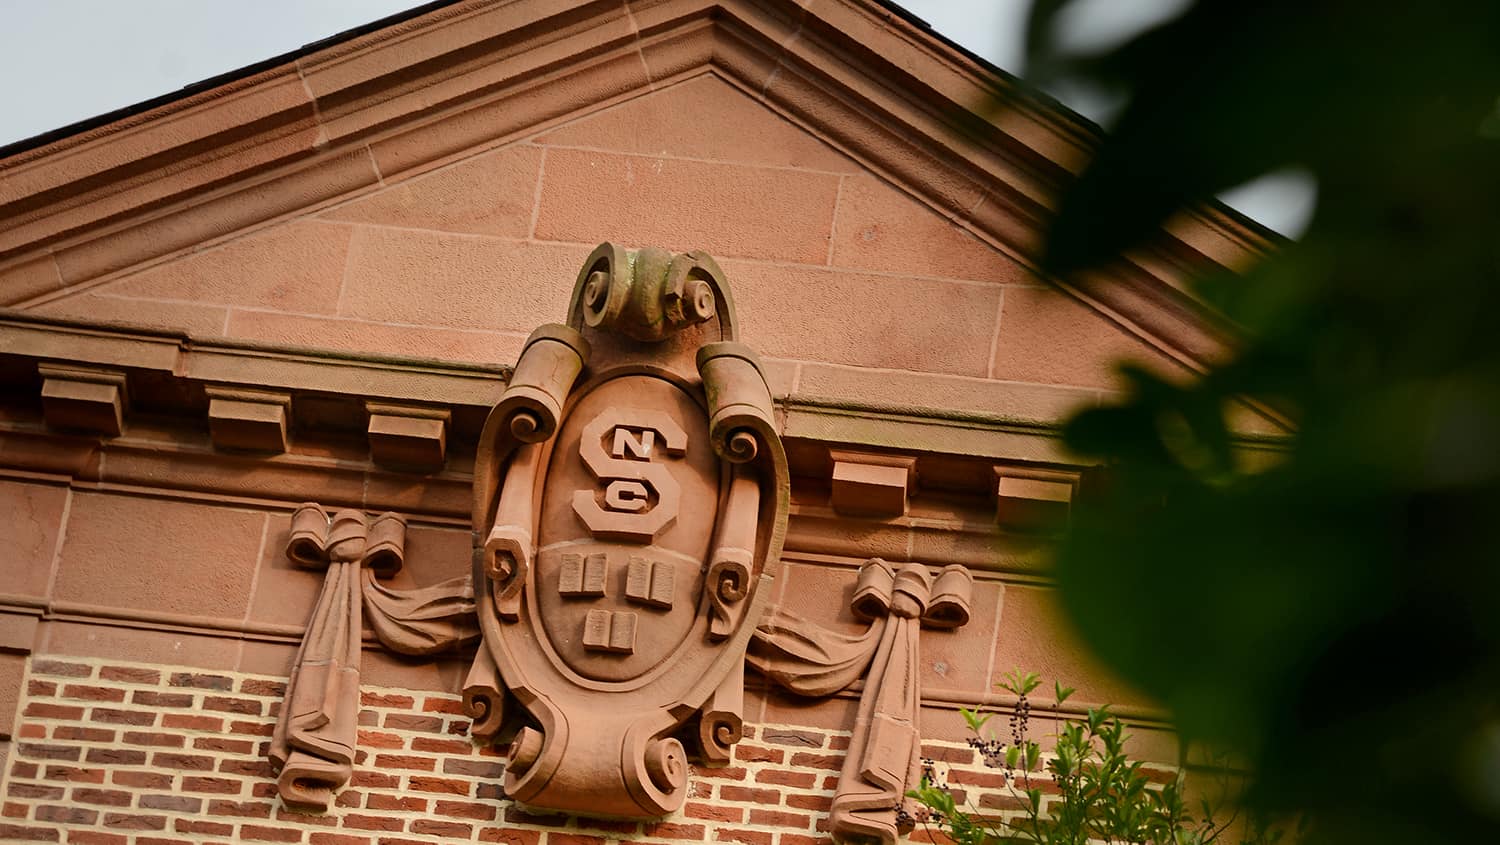 The facade of Holladay Hall shows an old, ornate NC State seal.